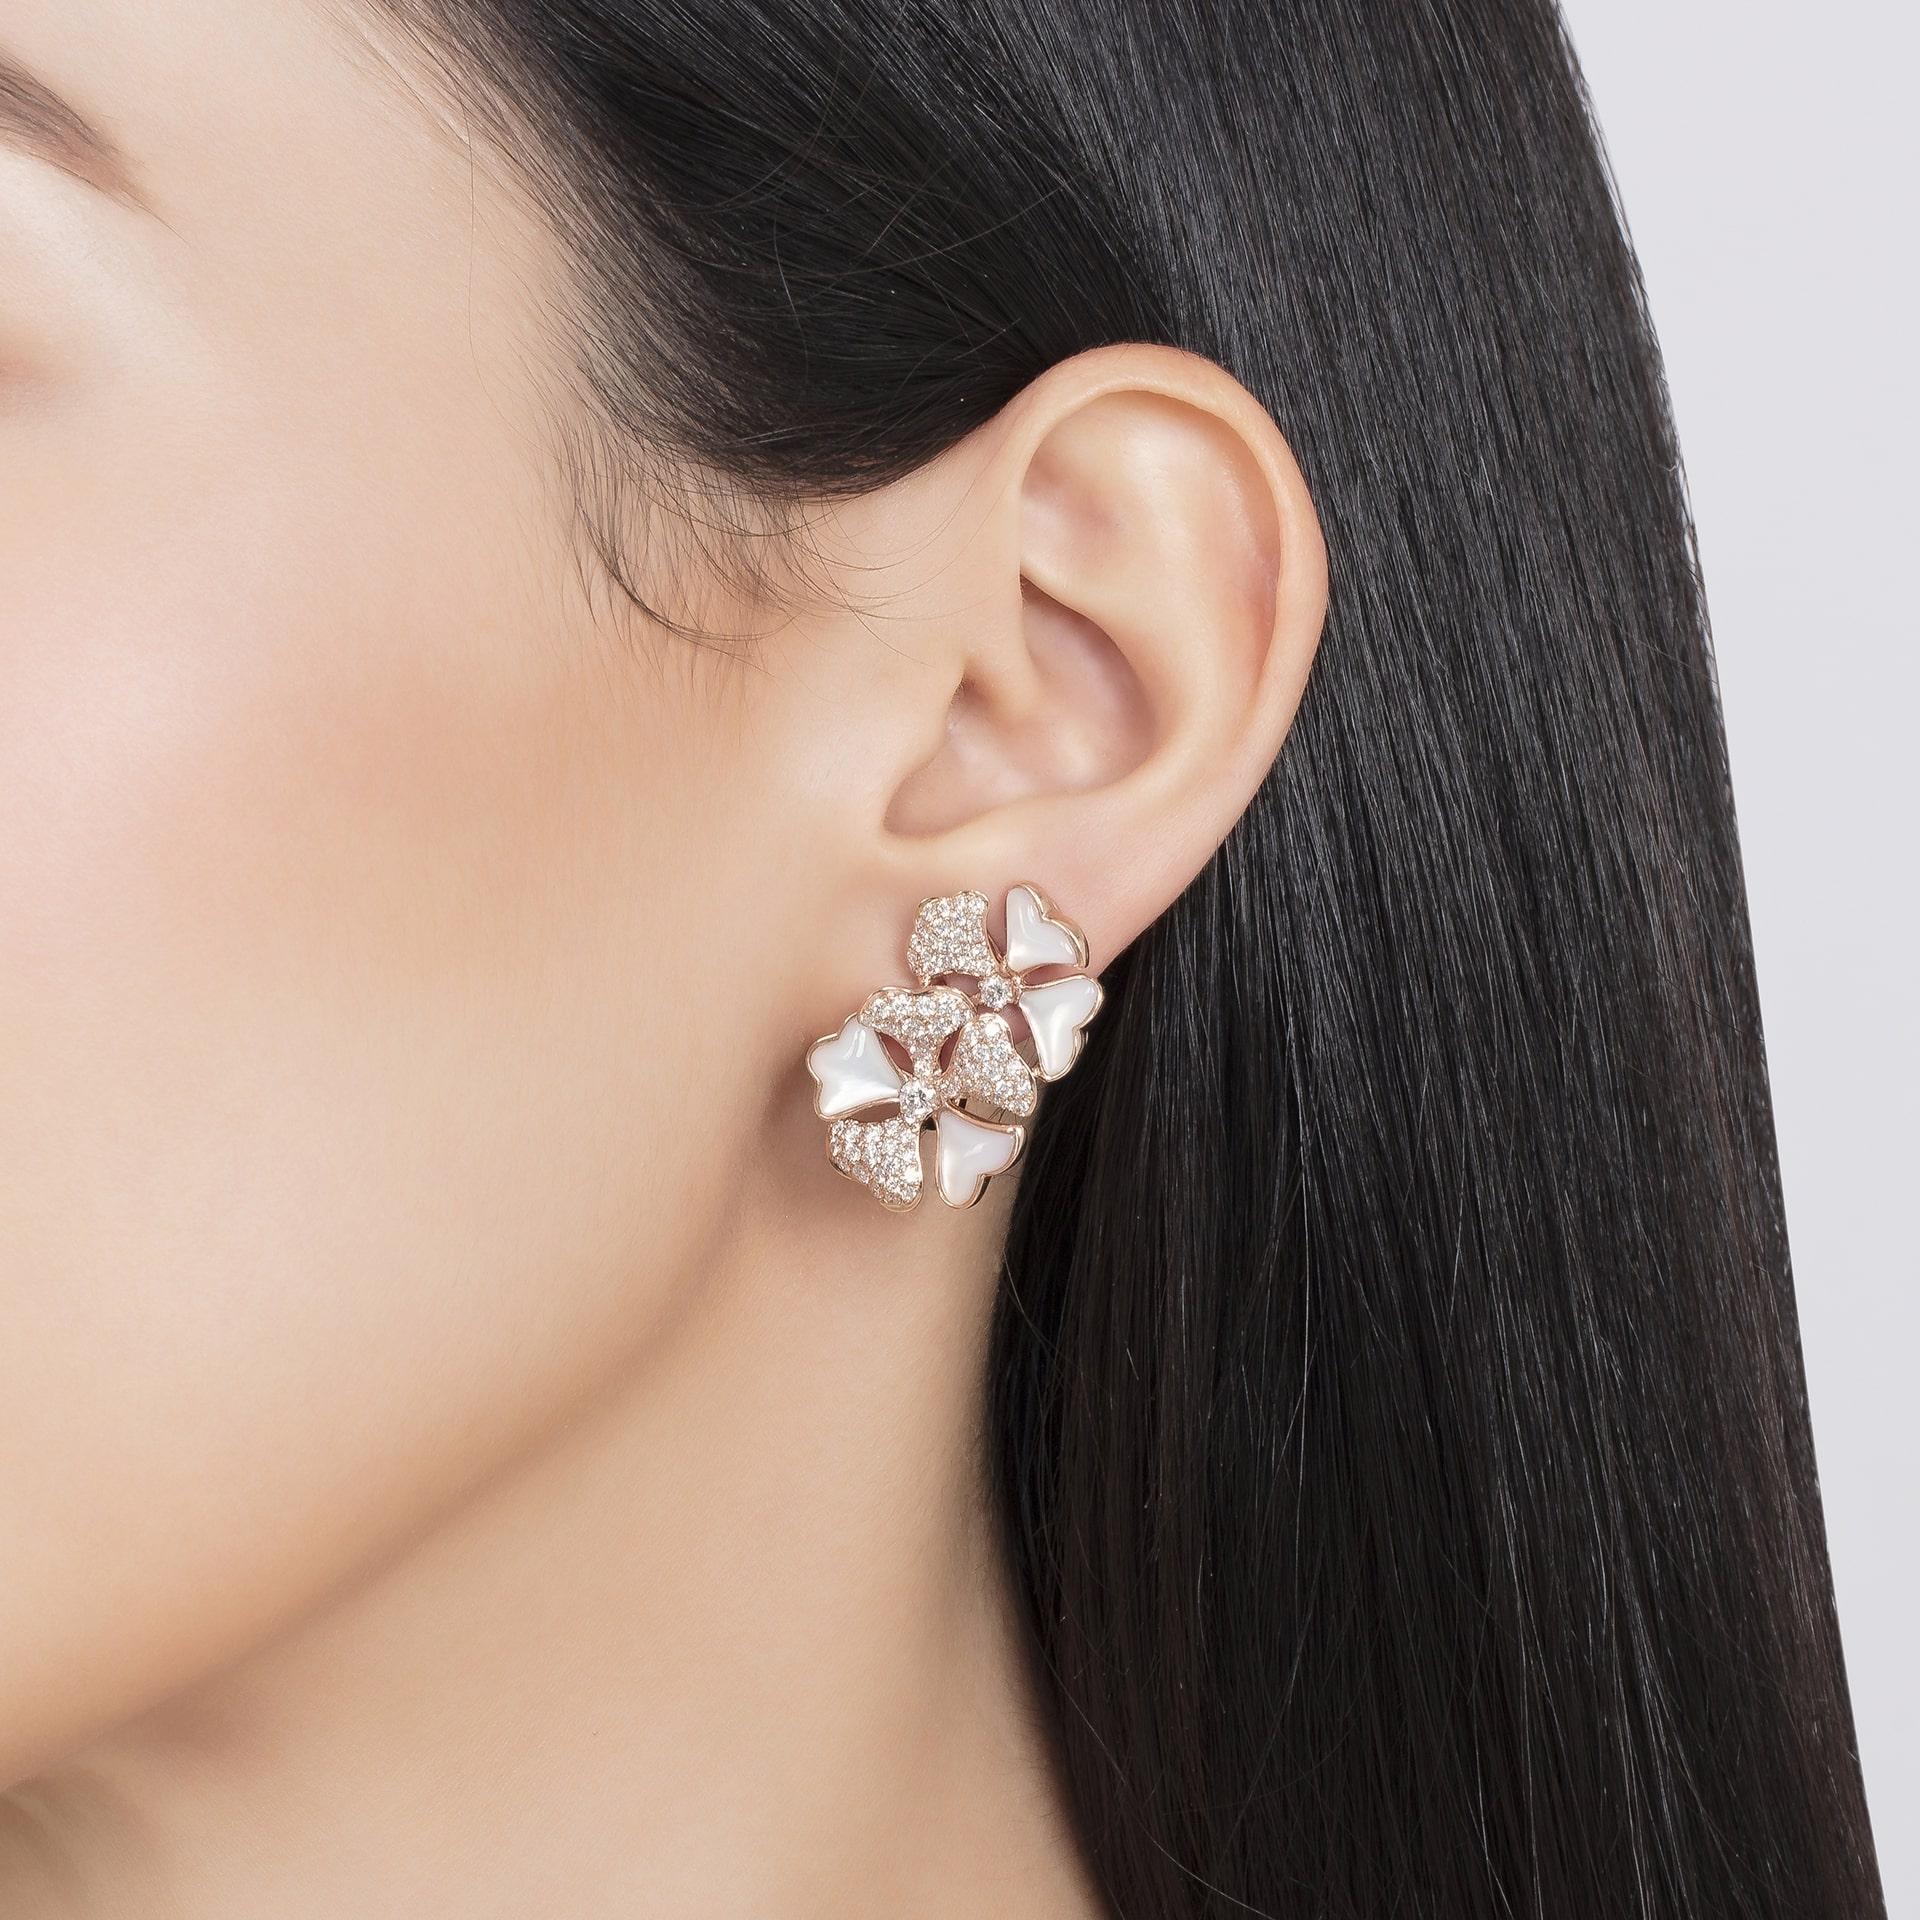 Bloom Diamond and White Mother-of-Pearl Cluster Earrings in 18K Yellow Gold

Inspired by the exquisite petals of the alpine cinquefoil, the Bloom collection contrasts the richness of diamonds and precious metals with the light versatility of this